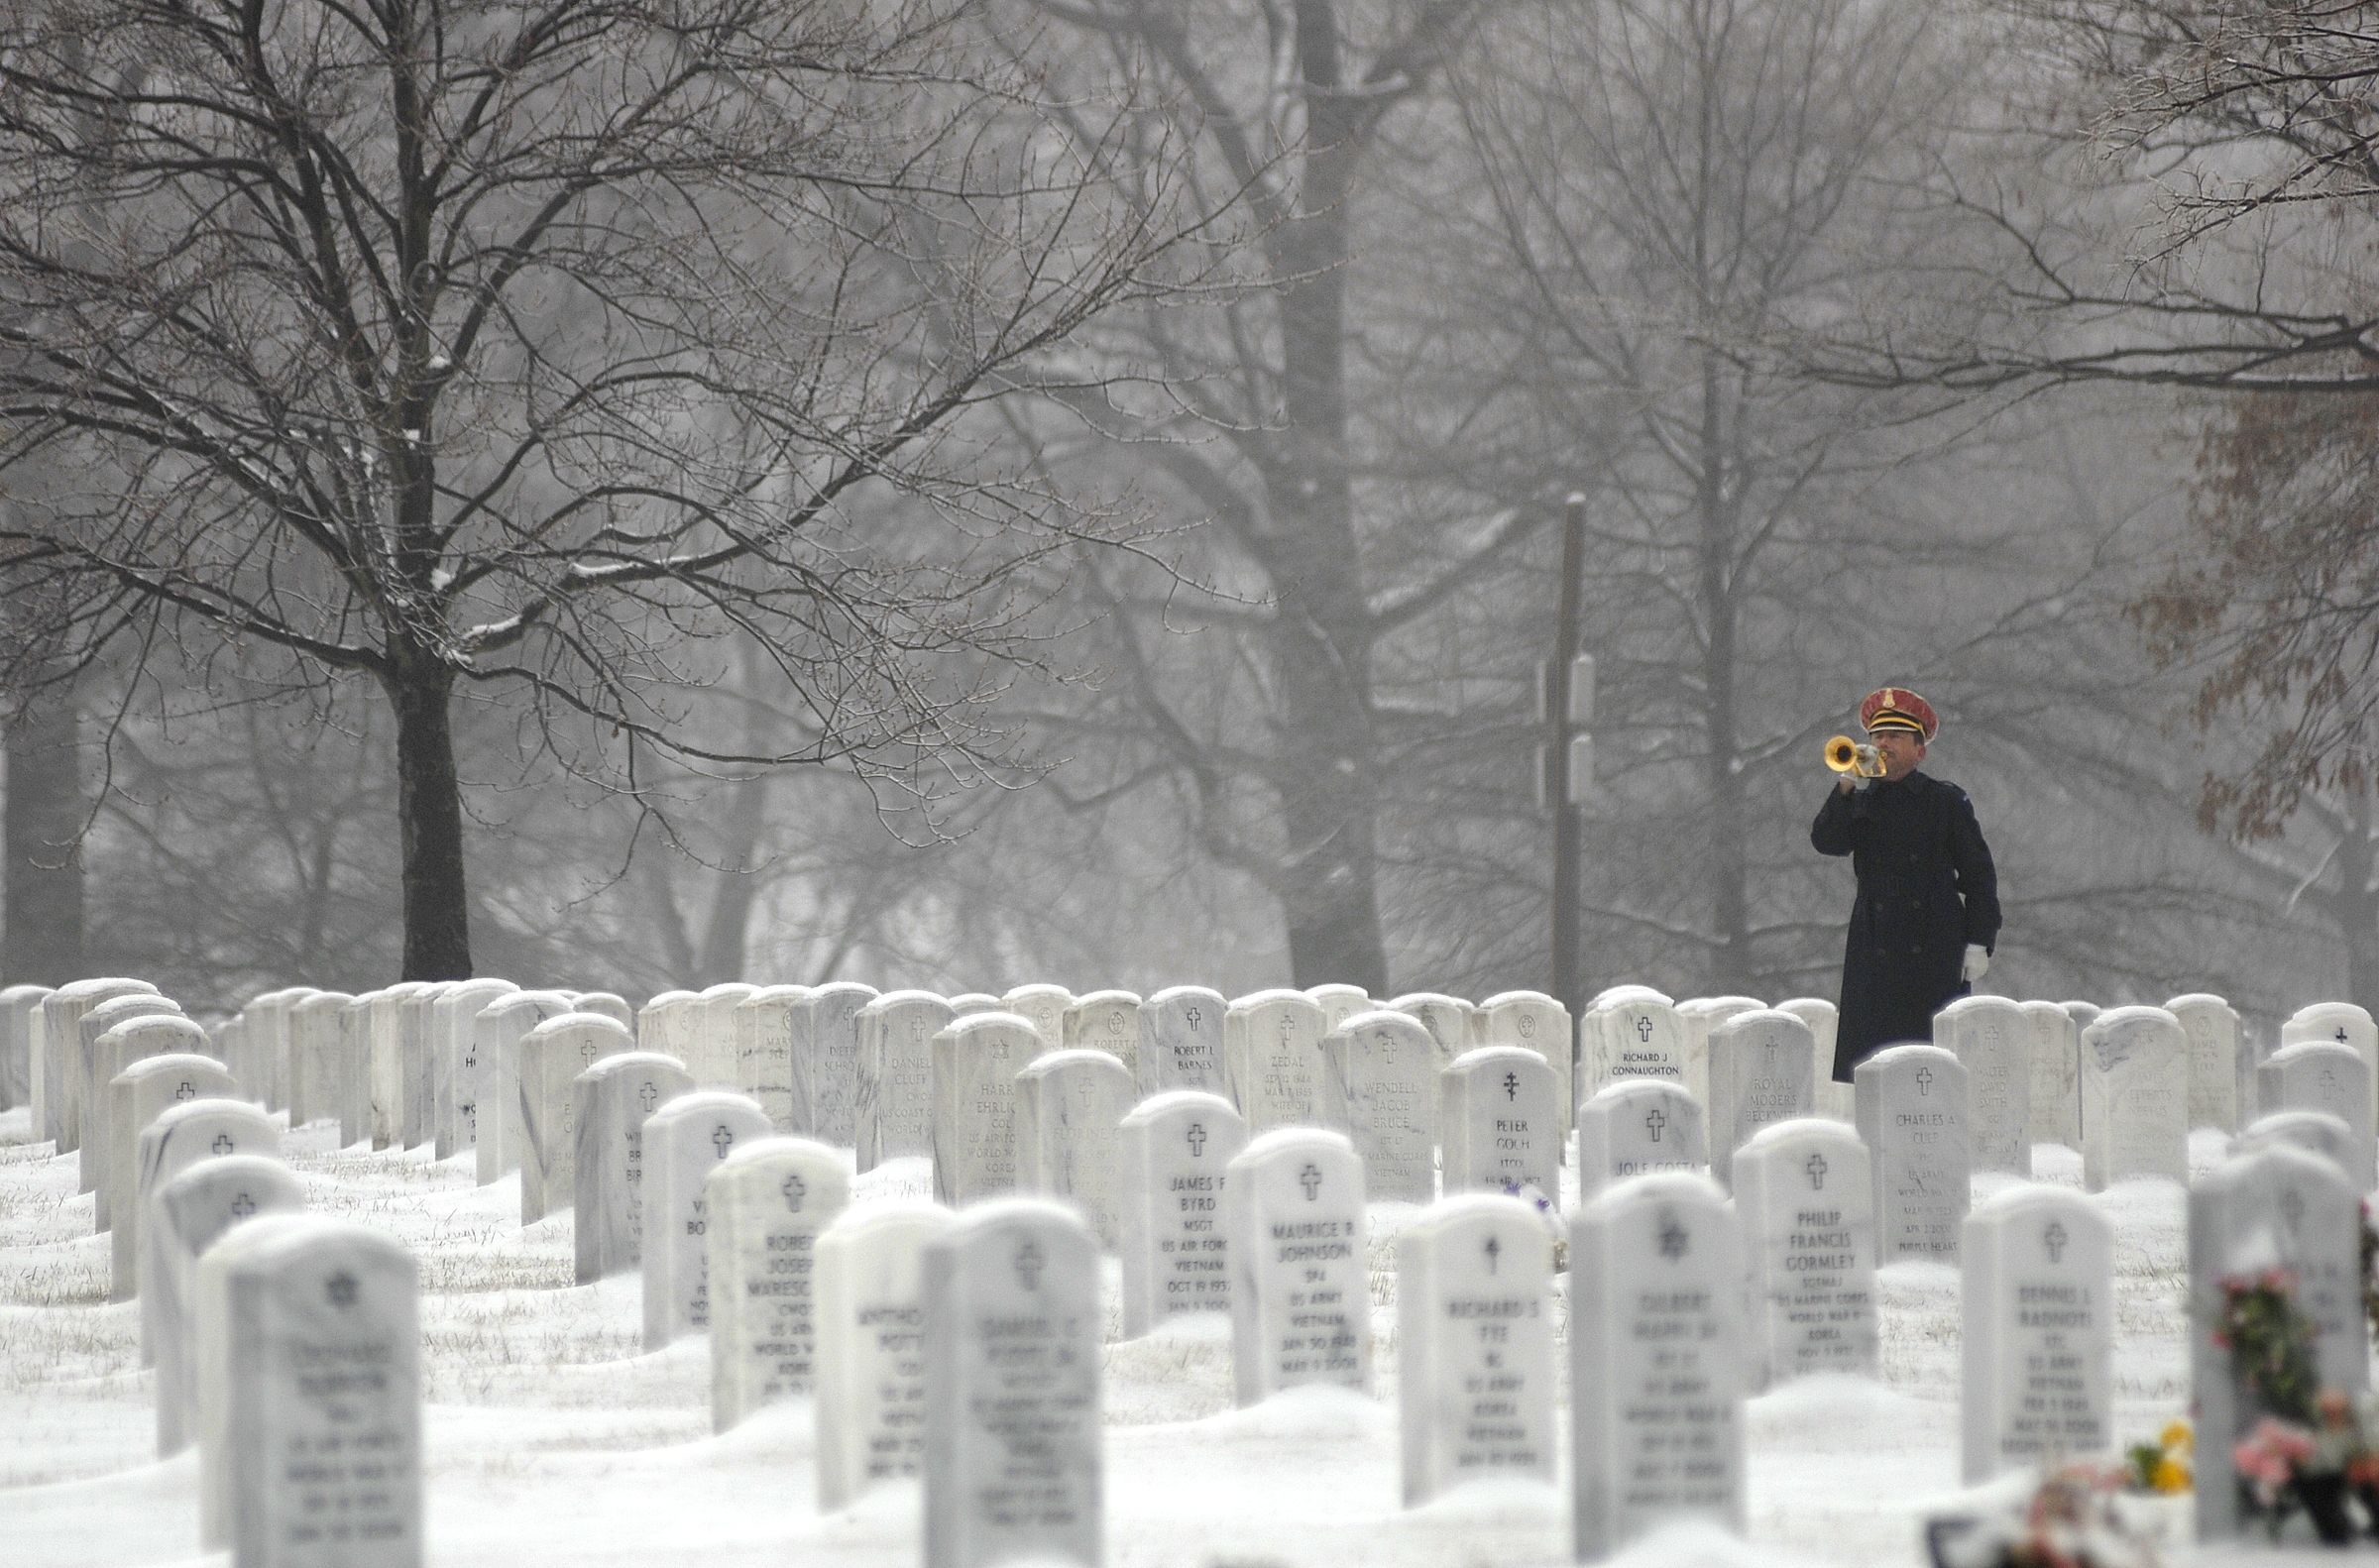 Taps is played on the bugle in the winter snow at Arlington National Cemetery